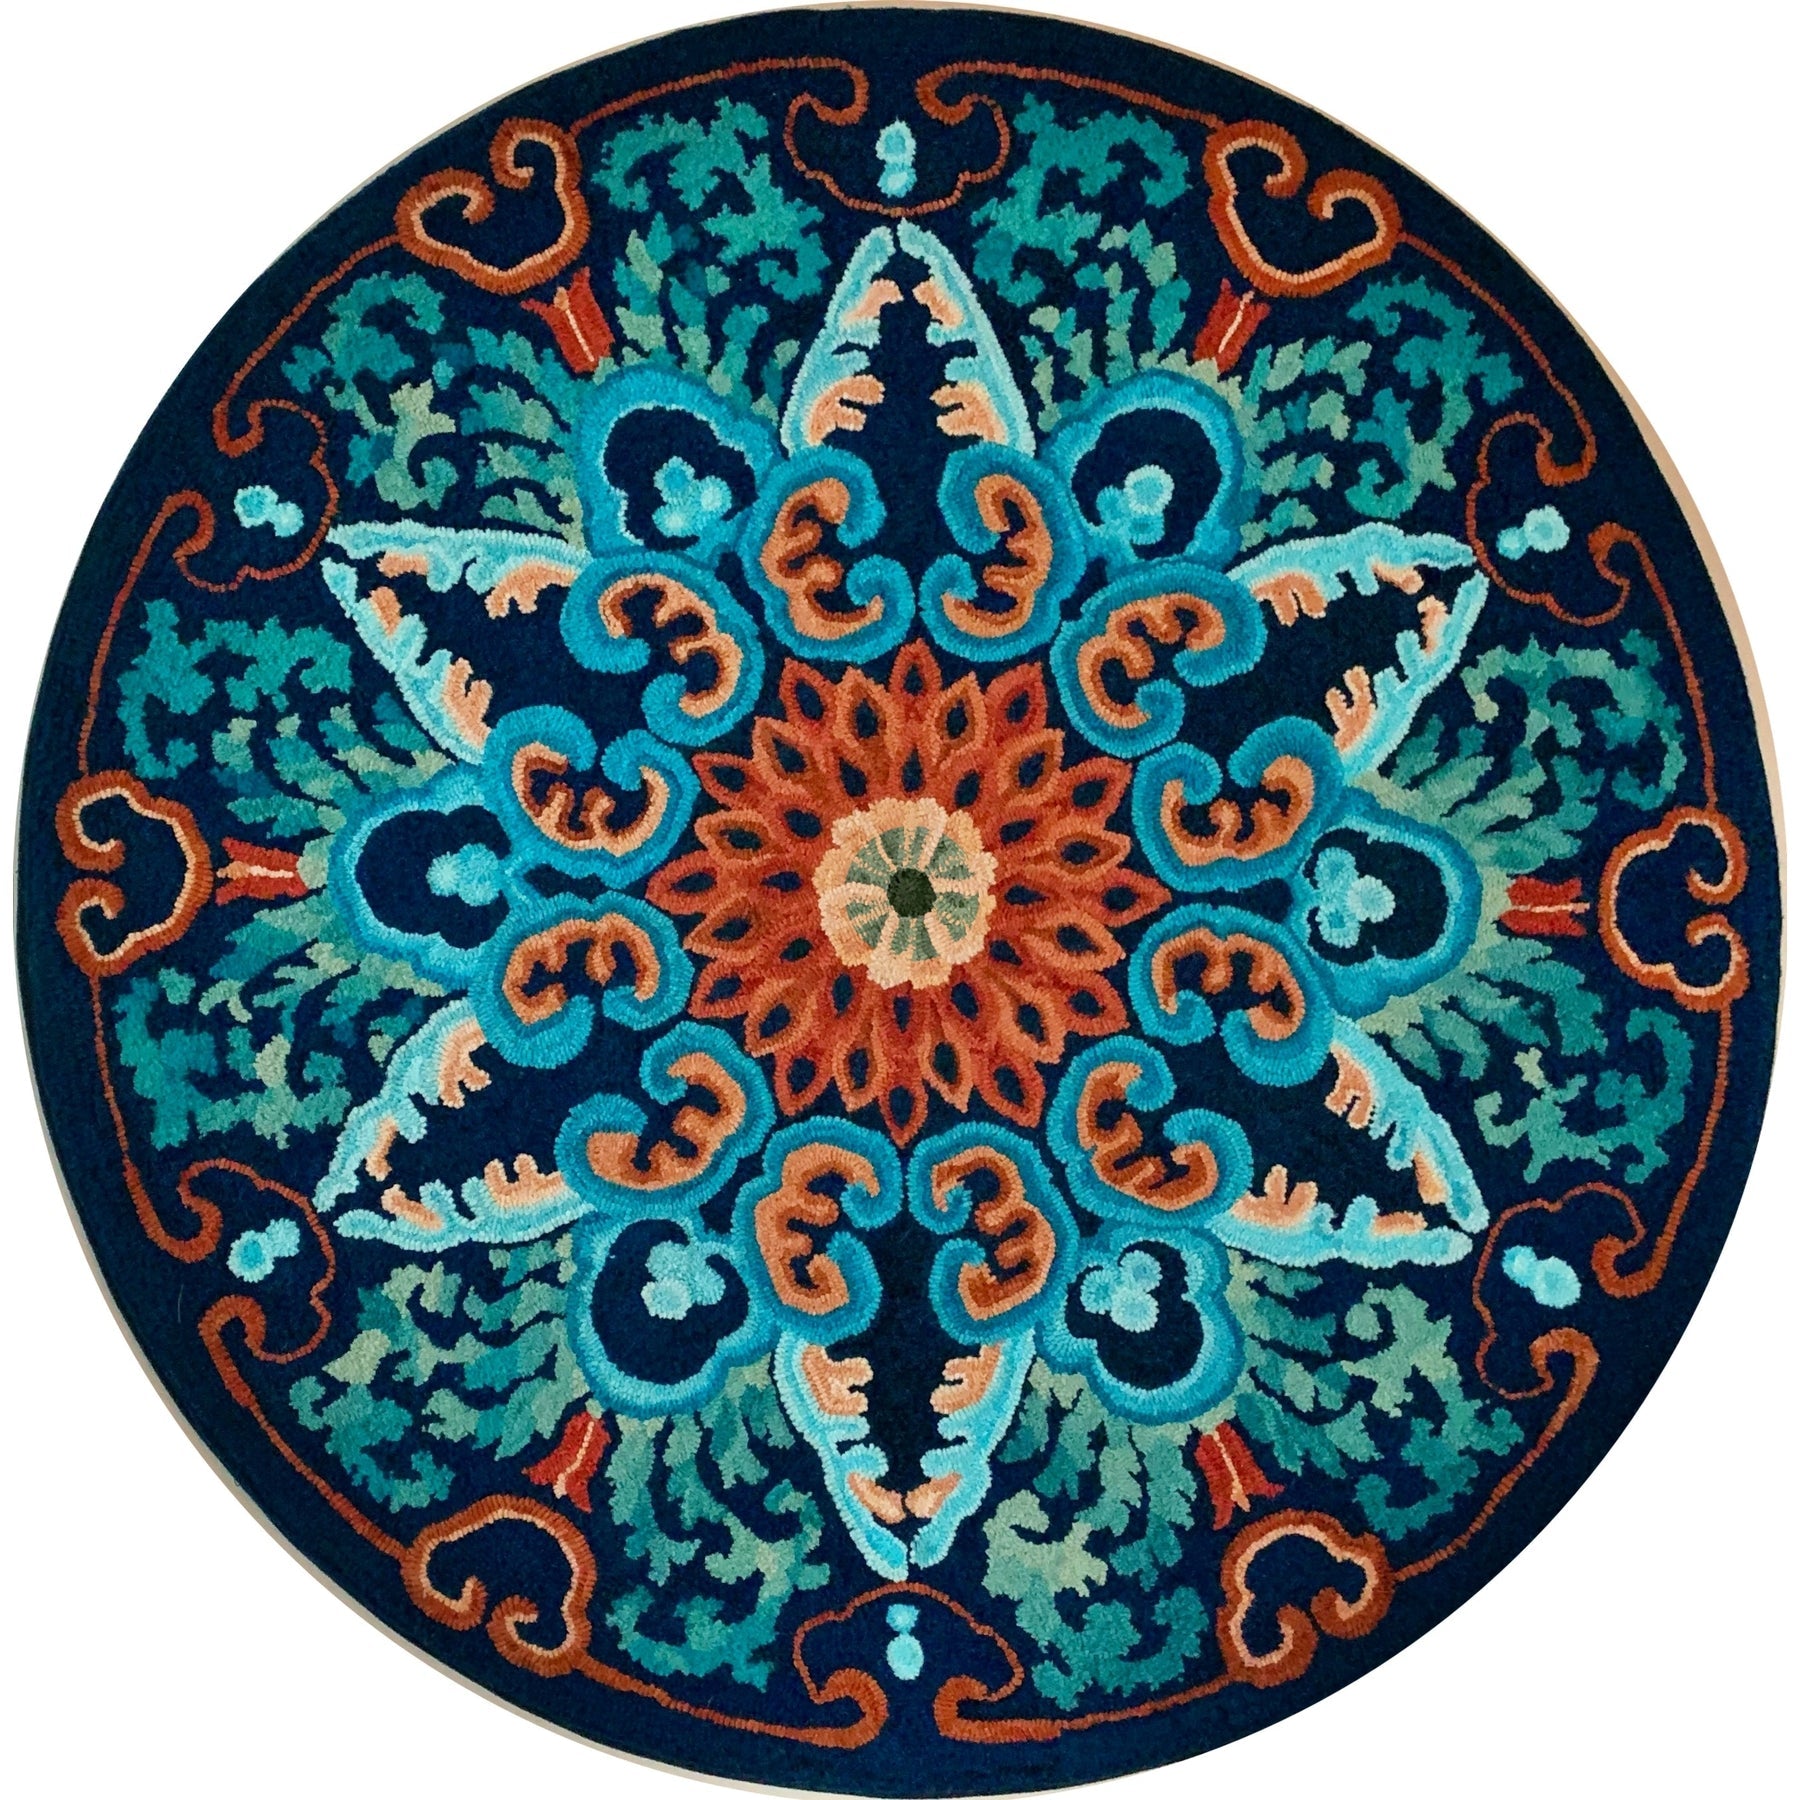 Chinese Rondel, rug hooked by Elaine Young